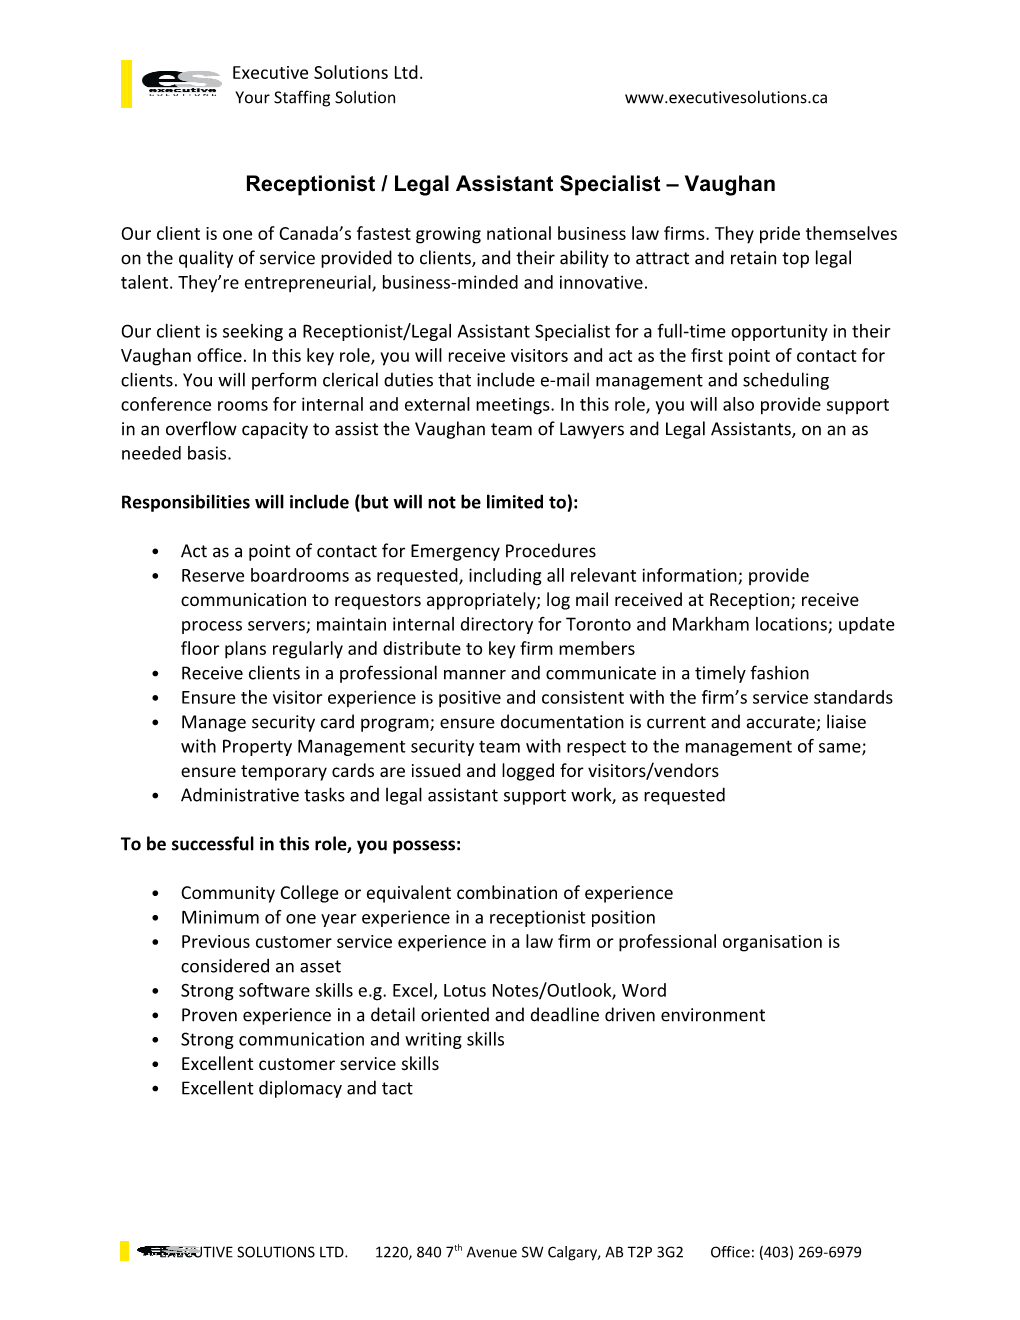 Receptionist / Legal Assistant Specialist Vaughan